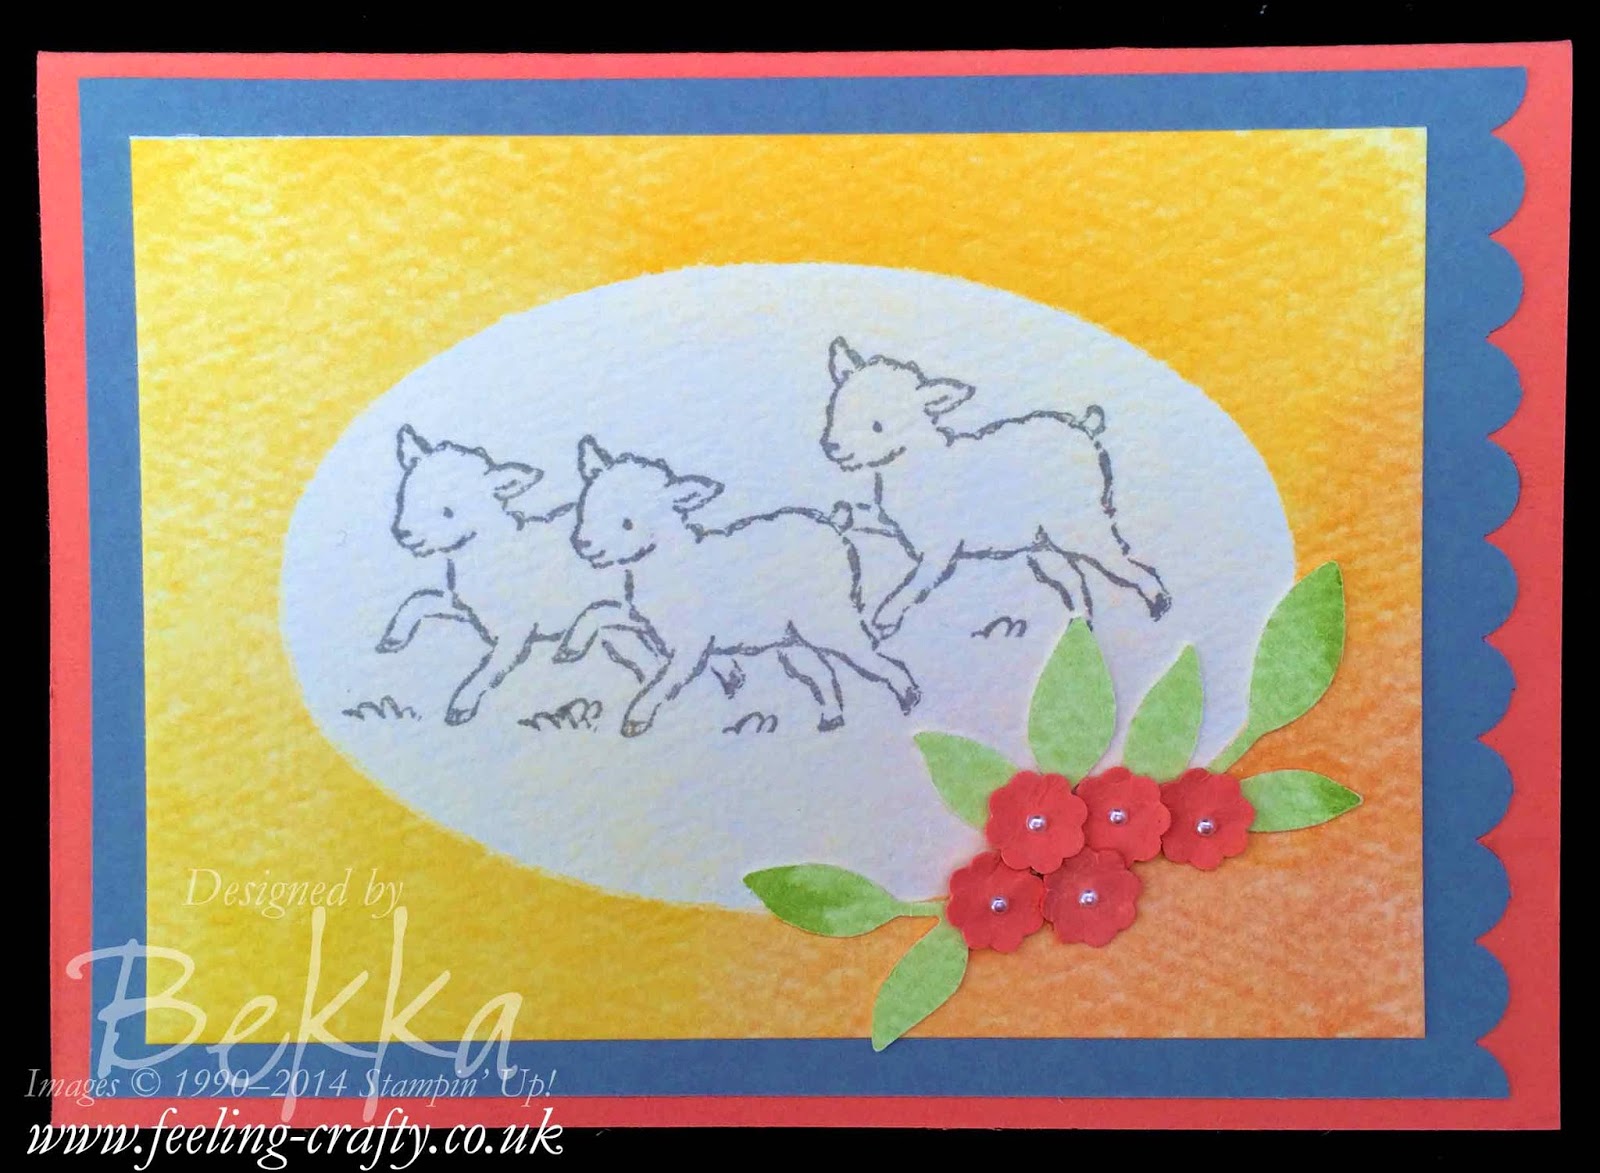 Counting Sheep - A Storybook Friends Card by UK Stampin' Up! Demo Bekka - she taught this at a class check it out here